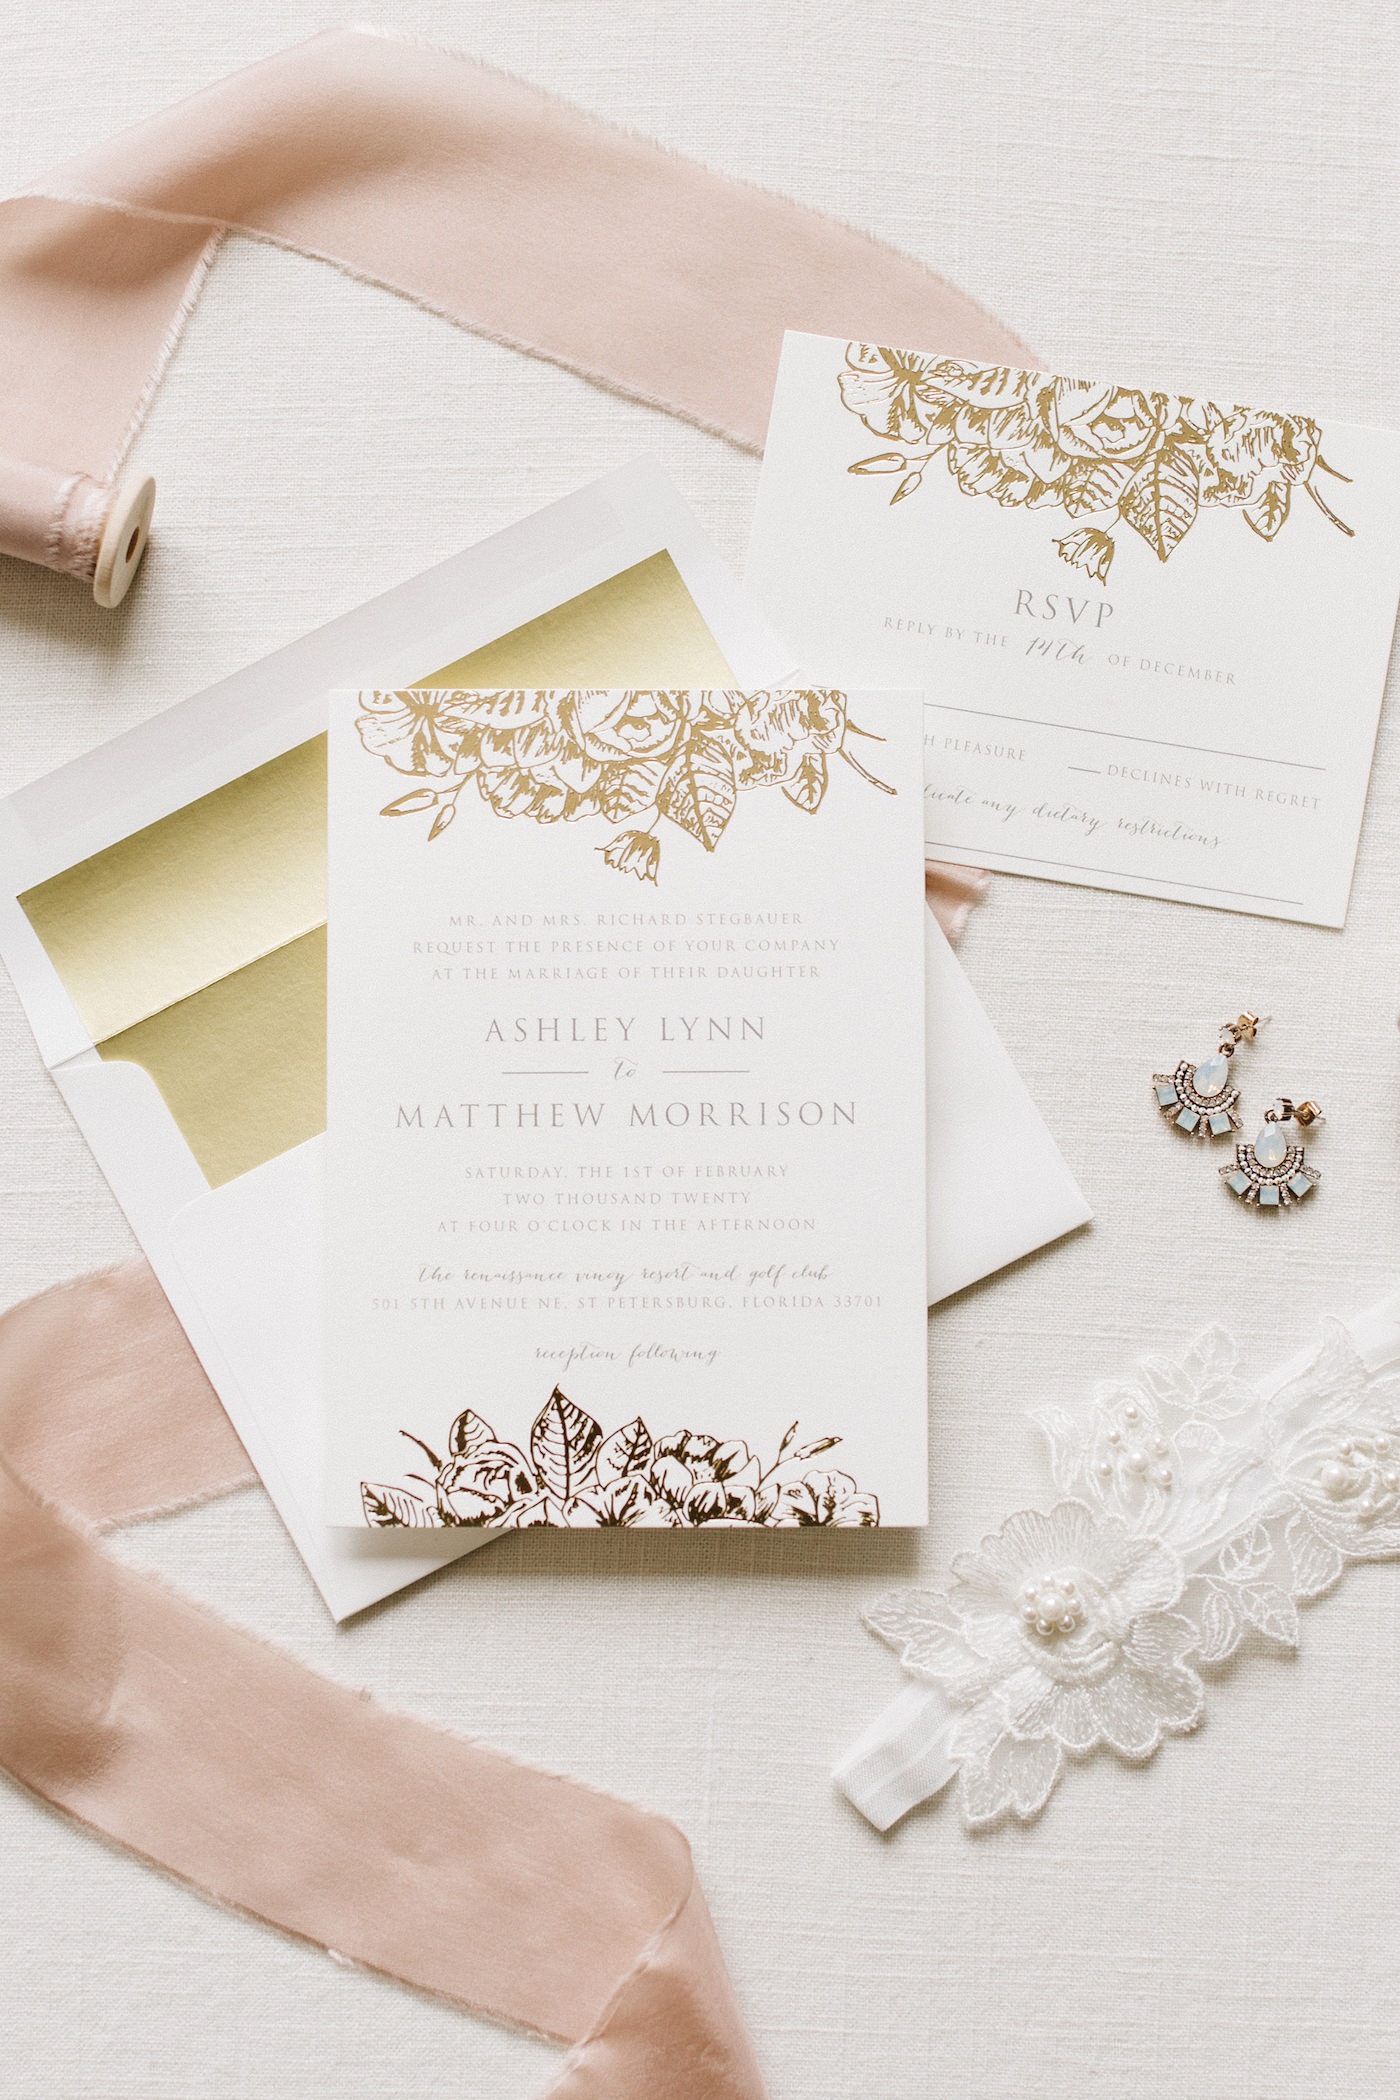 Elegant Florida Wedding Invitation Suite, Ivory, White and Gold Stationary with Rose Gold Foil Floral Detailing, Blue Boho Chic Earrings, White Lace Garter | Tampa Bay Luxury Wedding Planner Parties A’ La Carte